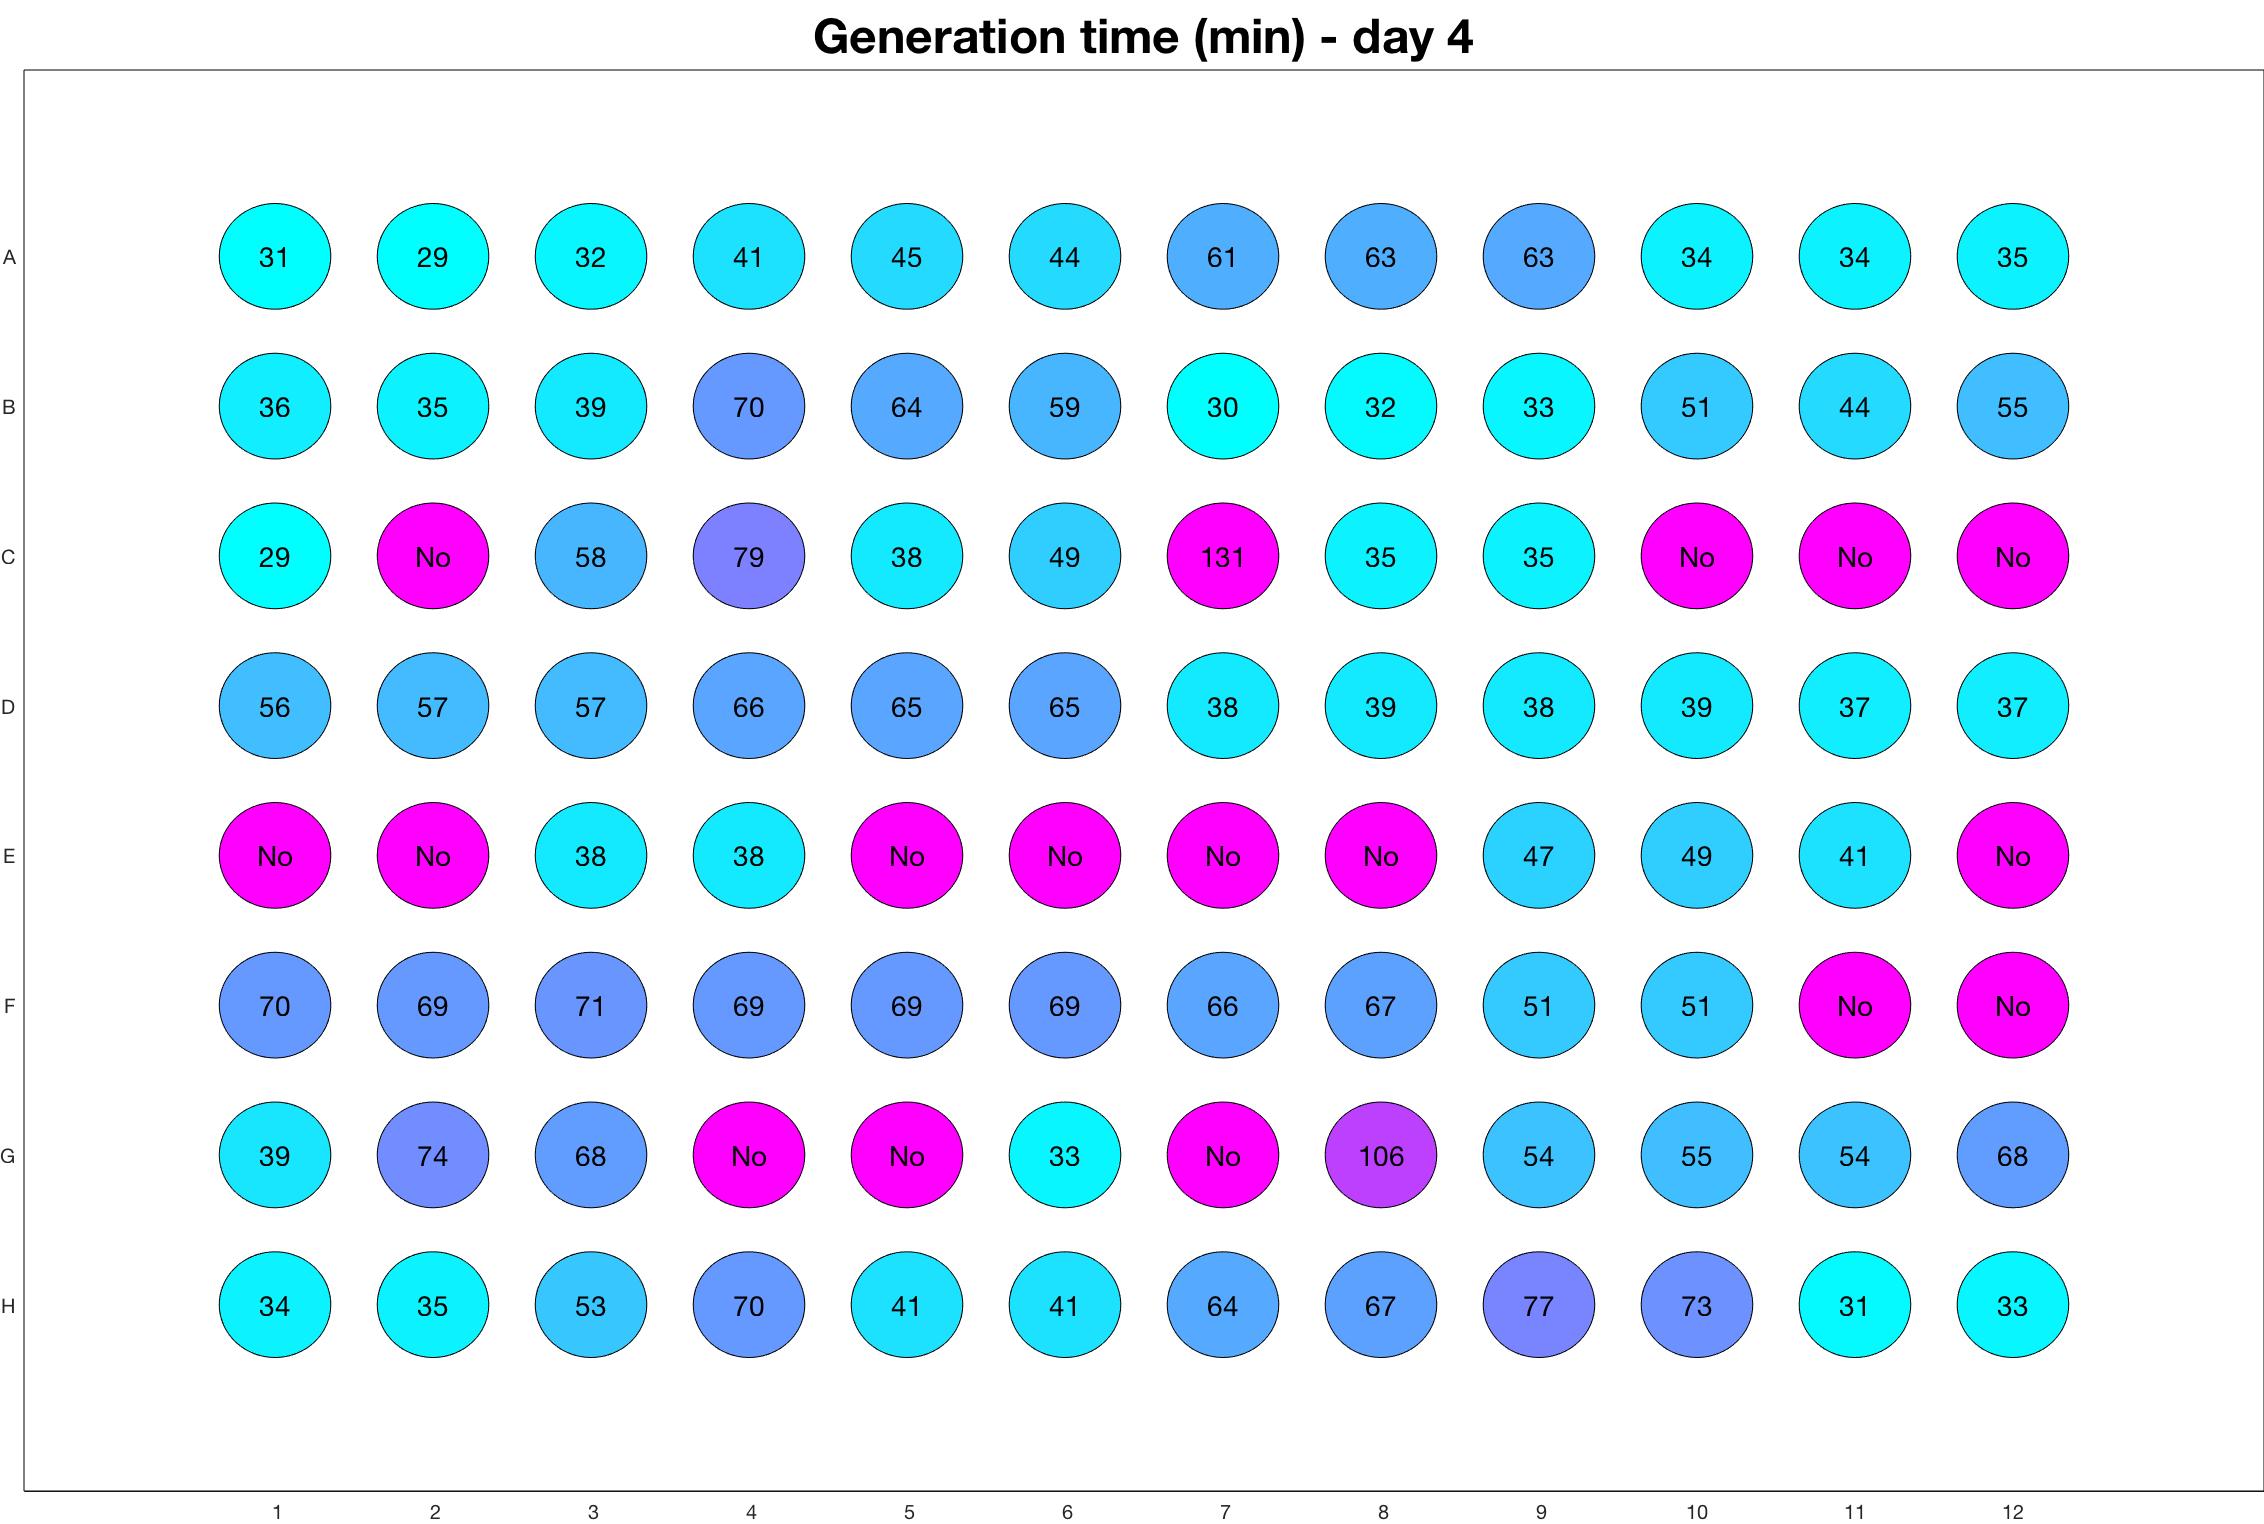 Generation time for day - 4.jpg